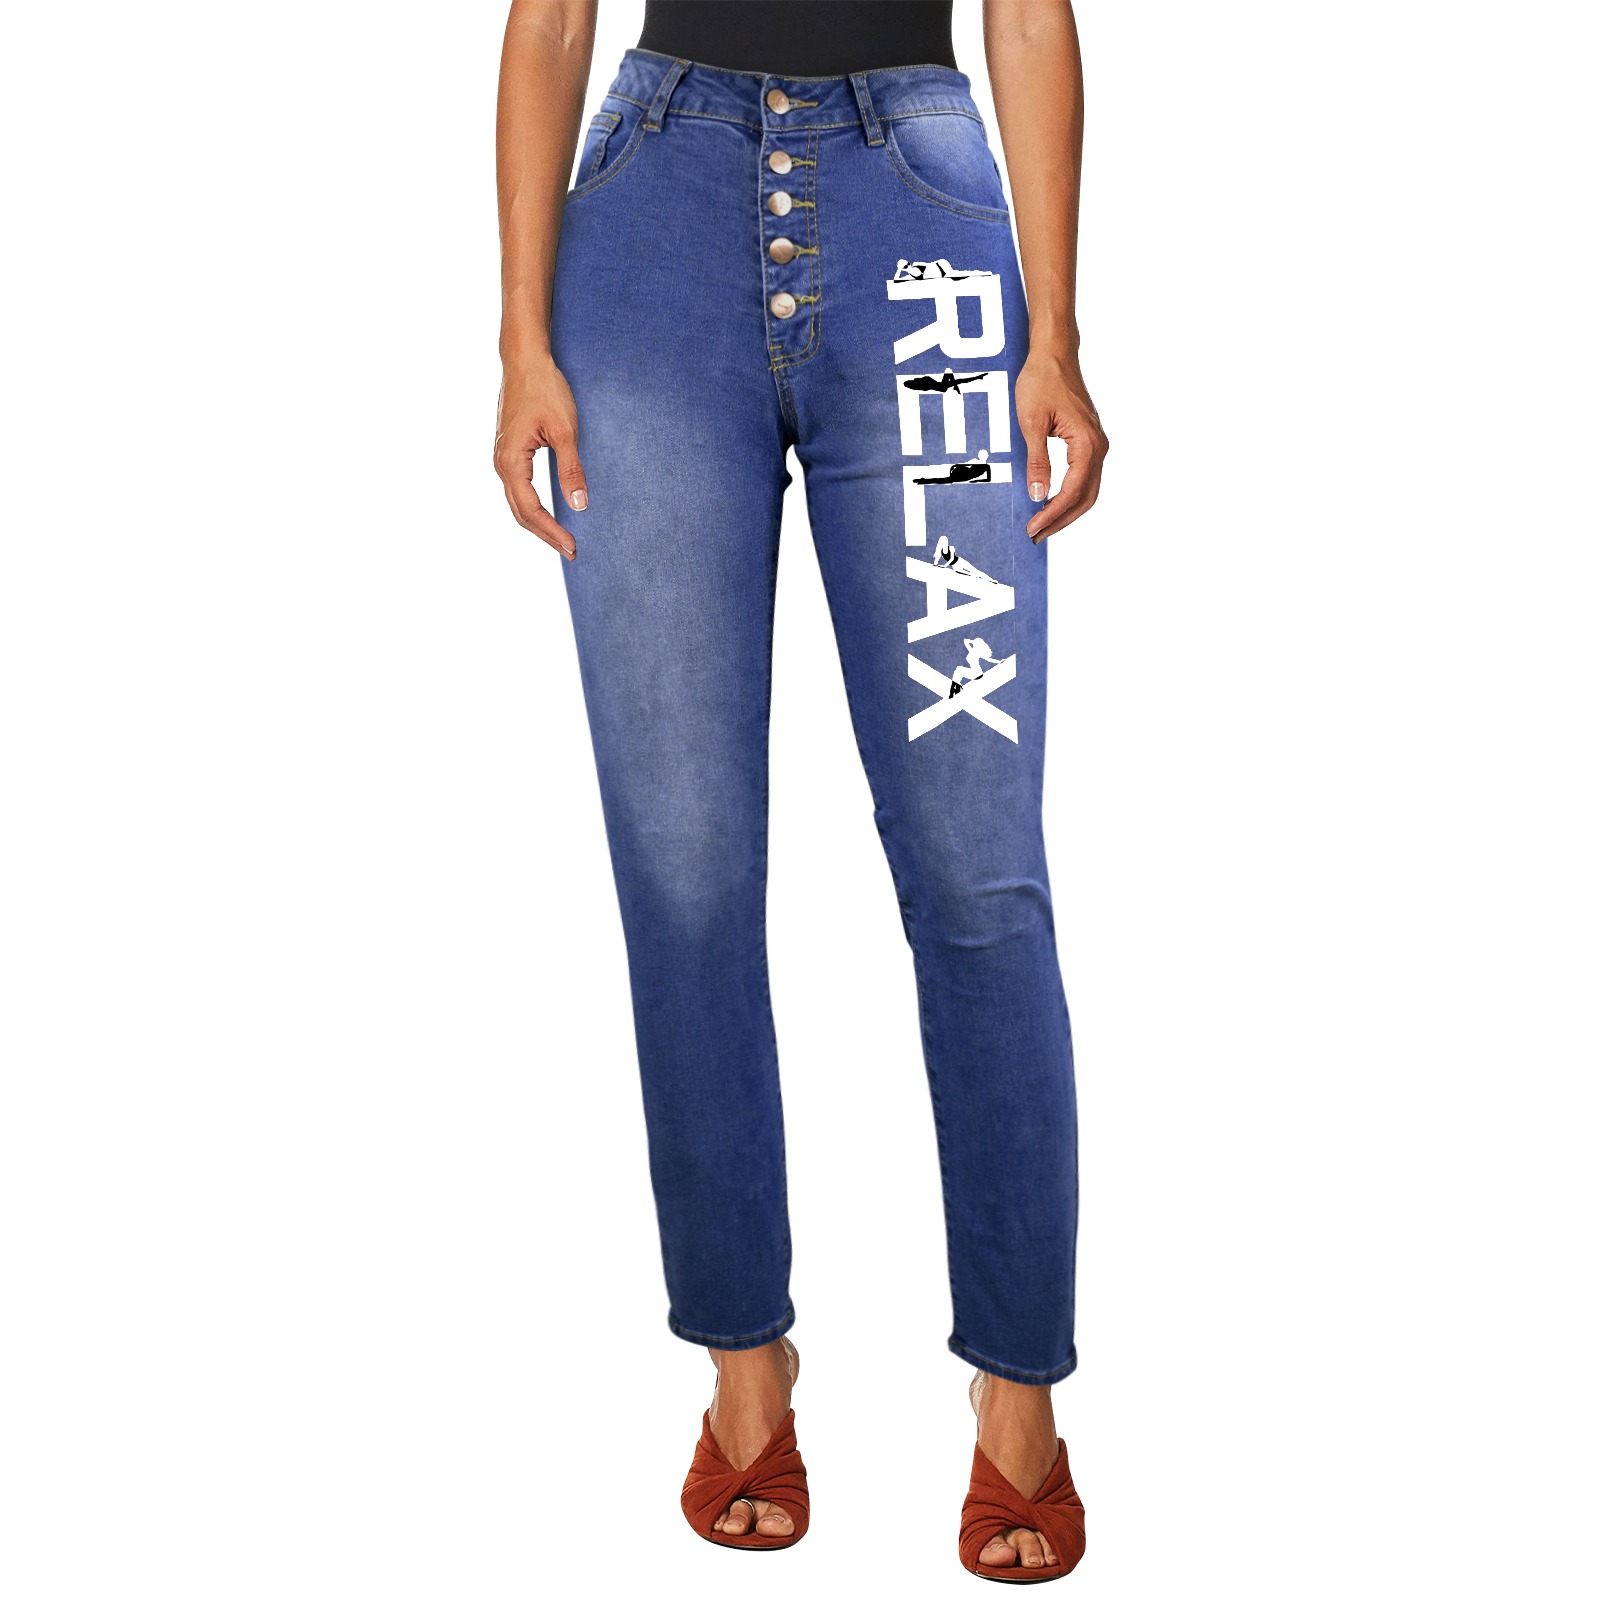 Relax white text and silhouettes of relaxing women Women's Jeans (Front Printing)